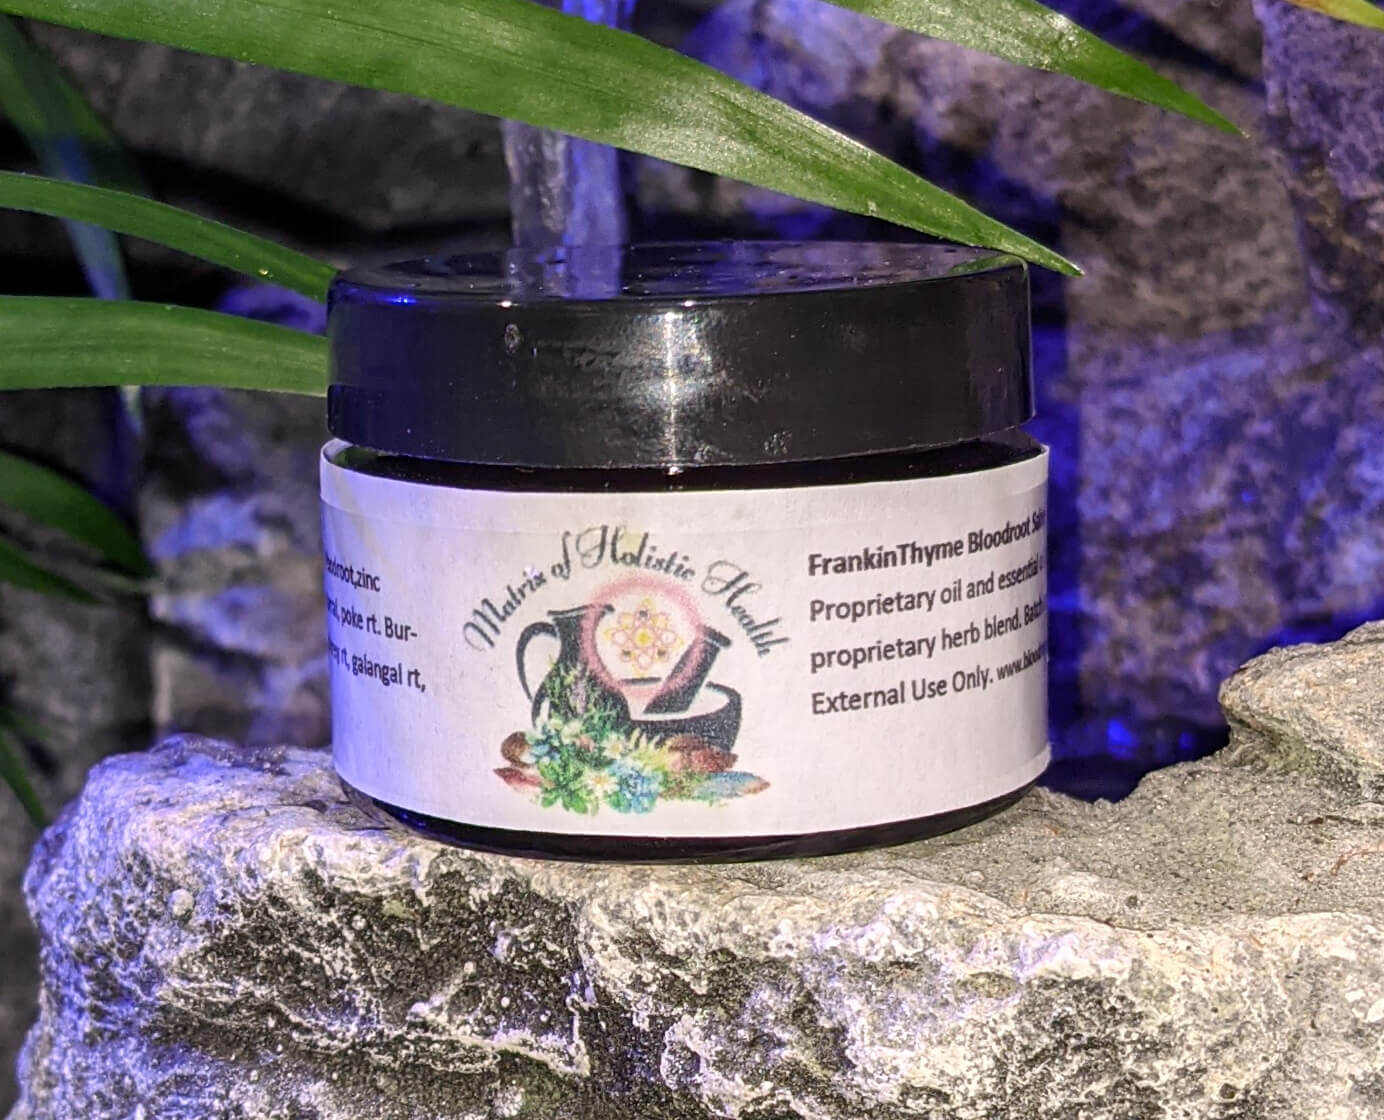 FranklinThyme Bloodroot Salve by Matrix of Holistic Health